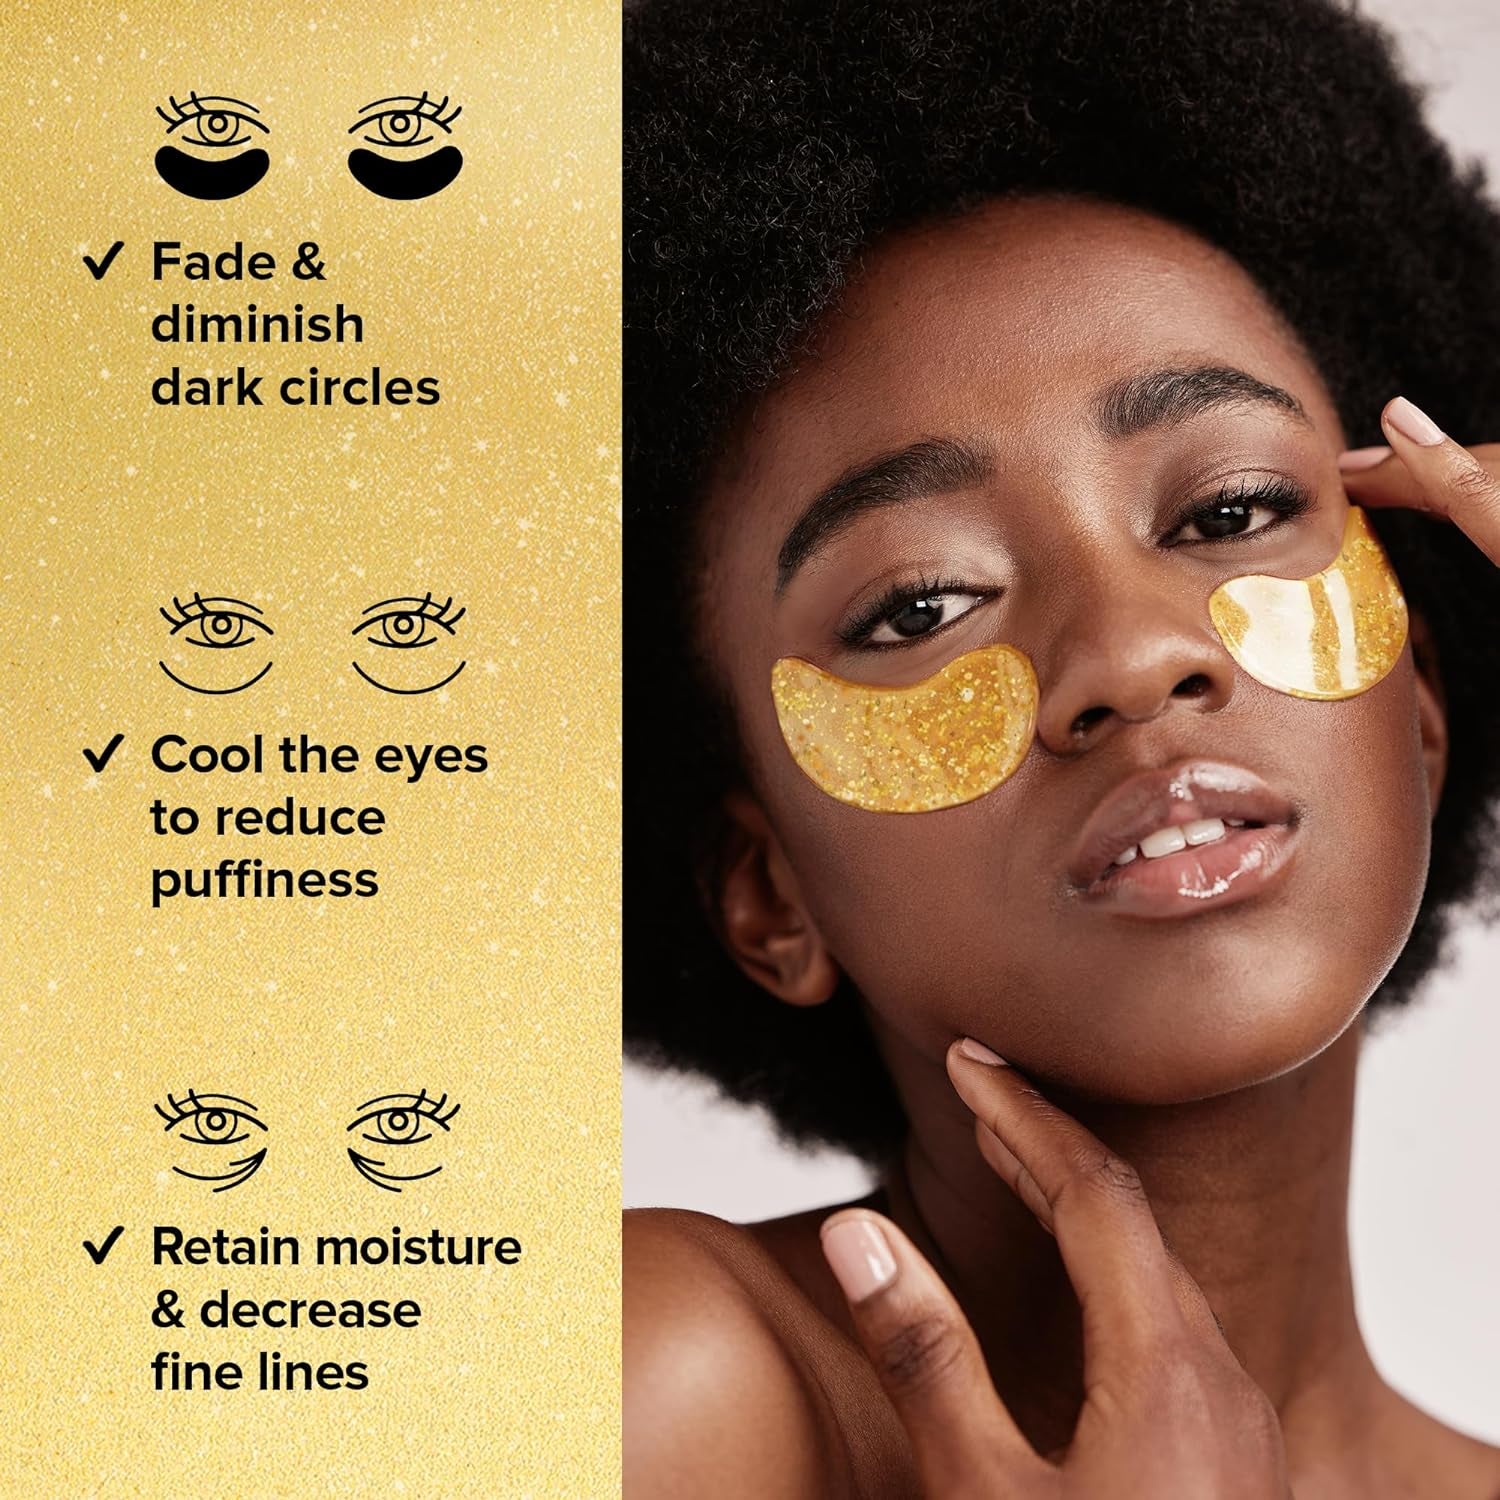 under Eye Patches (20 Pairs) - 24K Gold Eye Patches for Puffy Eyes, Dark Circles, Eye Bags - Skin Care with Collagen, Pearl Extract & Hyaluronic Acid - Anti-Aging & Rejuvenating Eye Masks